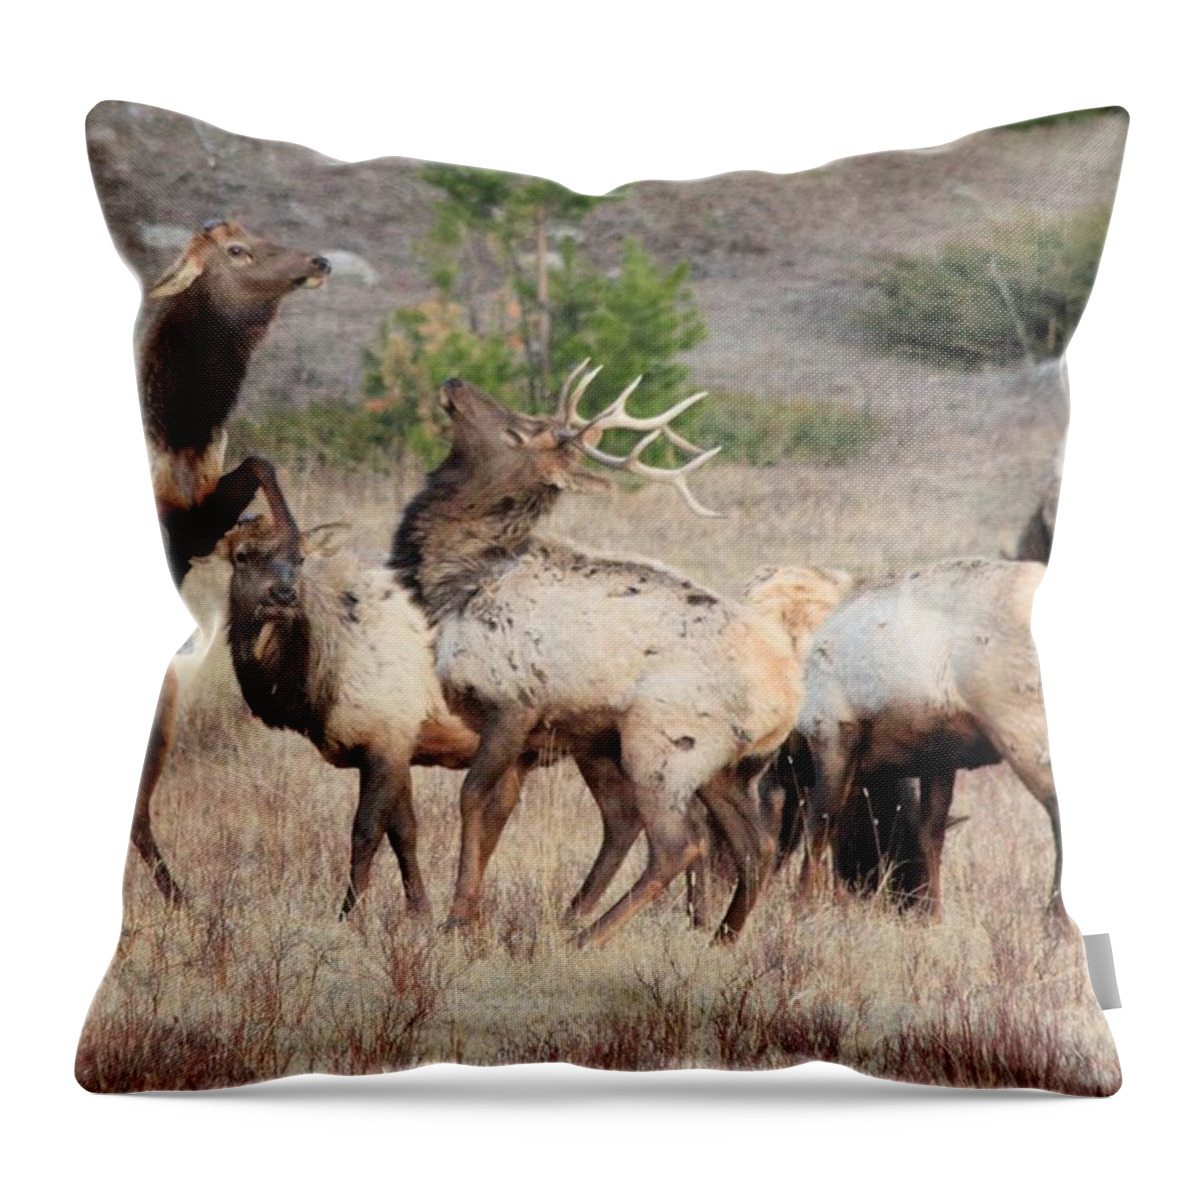 Elk Throw Pillow featuring the photograph Boxing Match by Shane Bechler